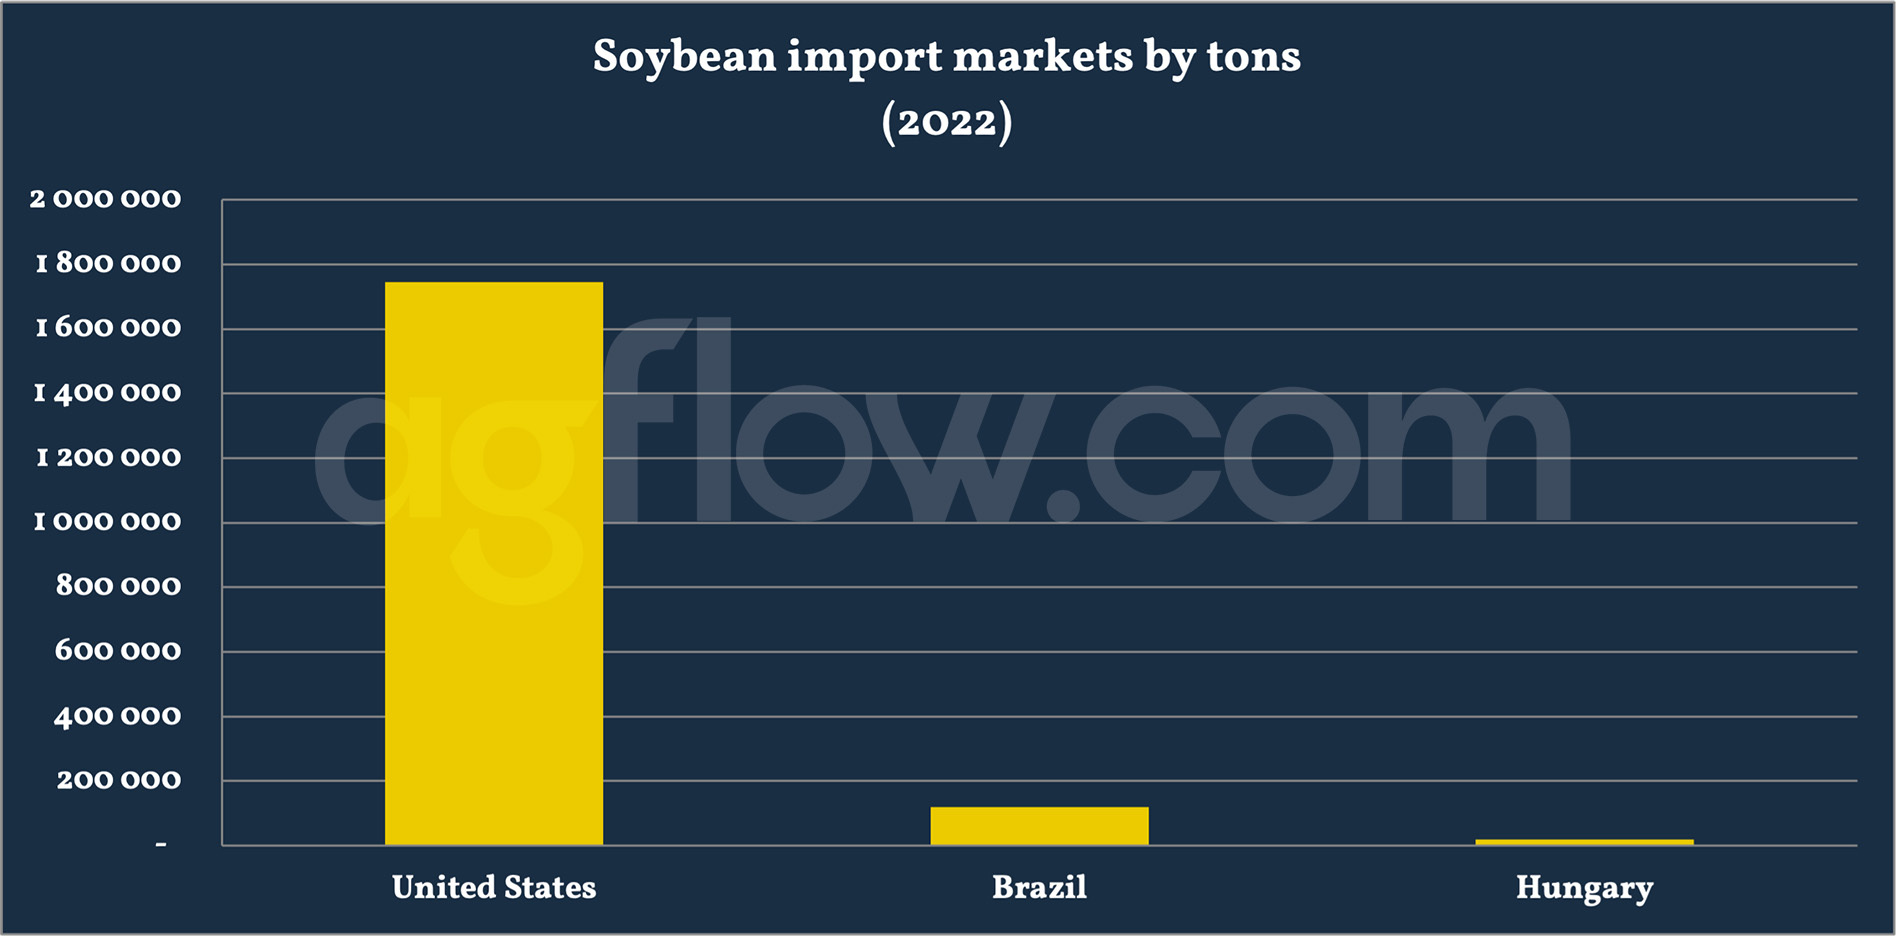 German Soybeans: Via Holland or Not?